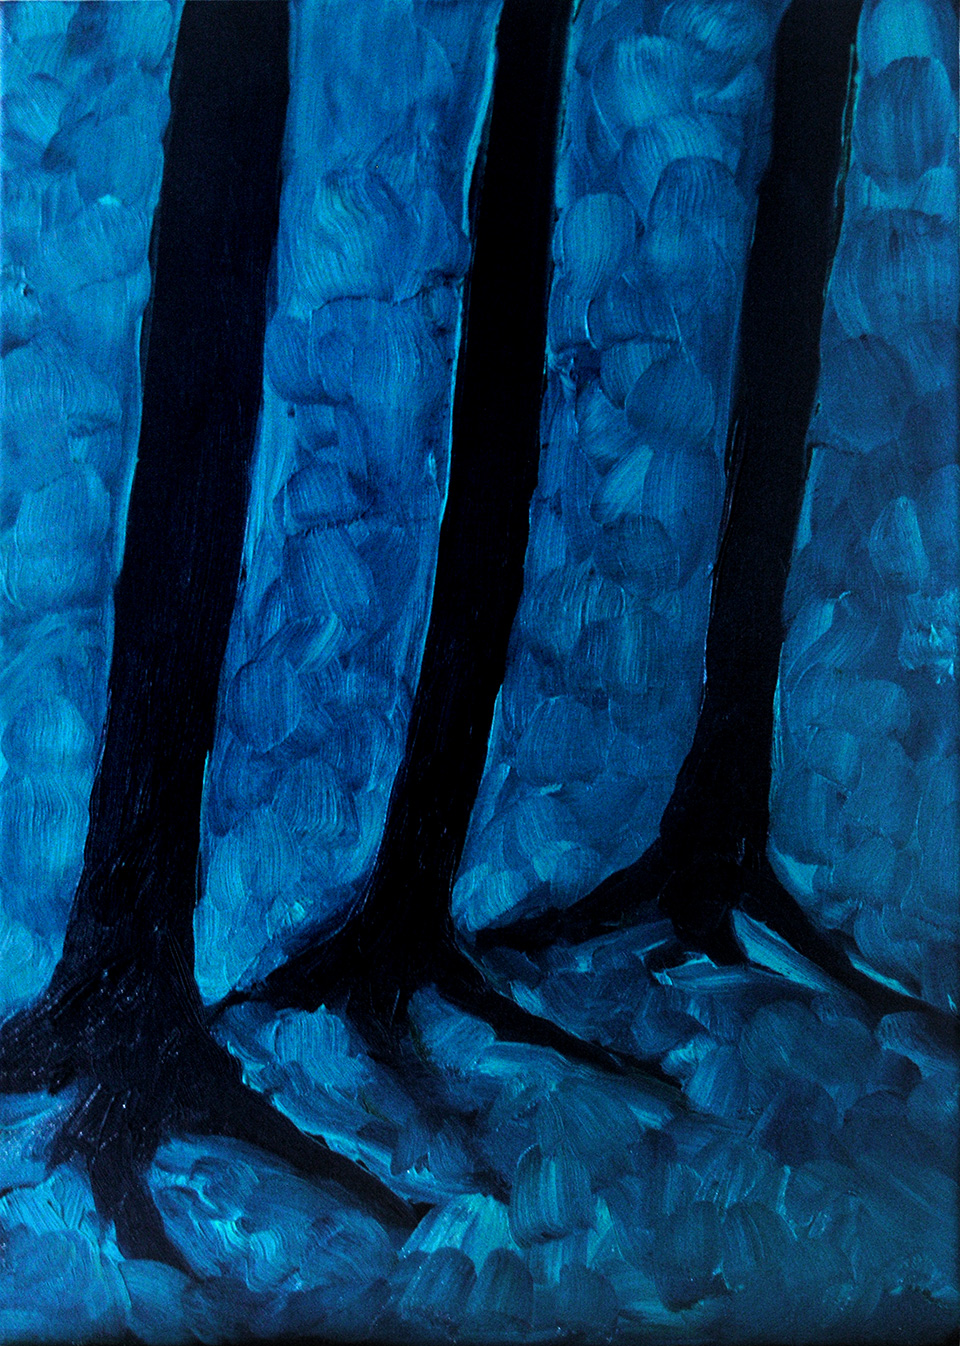 Tree 5, a painting by Guido Vrolix